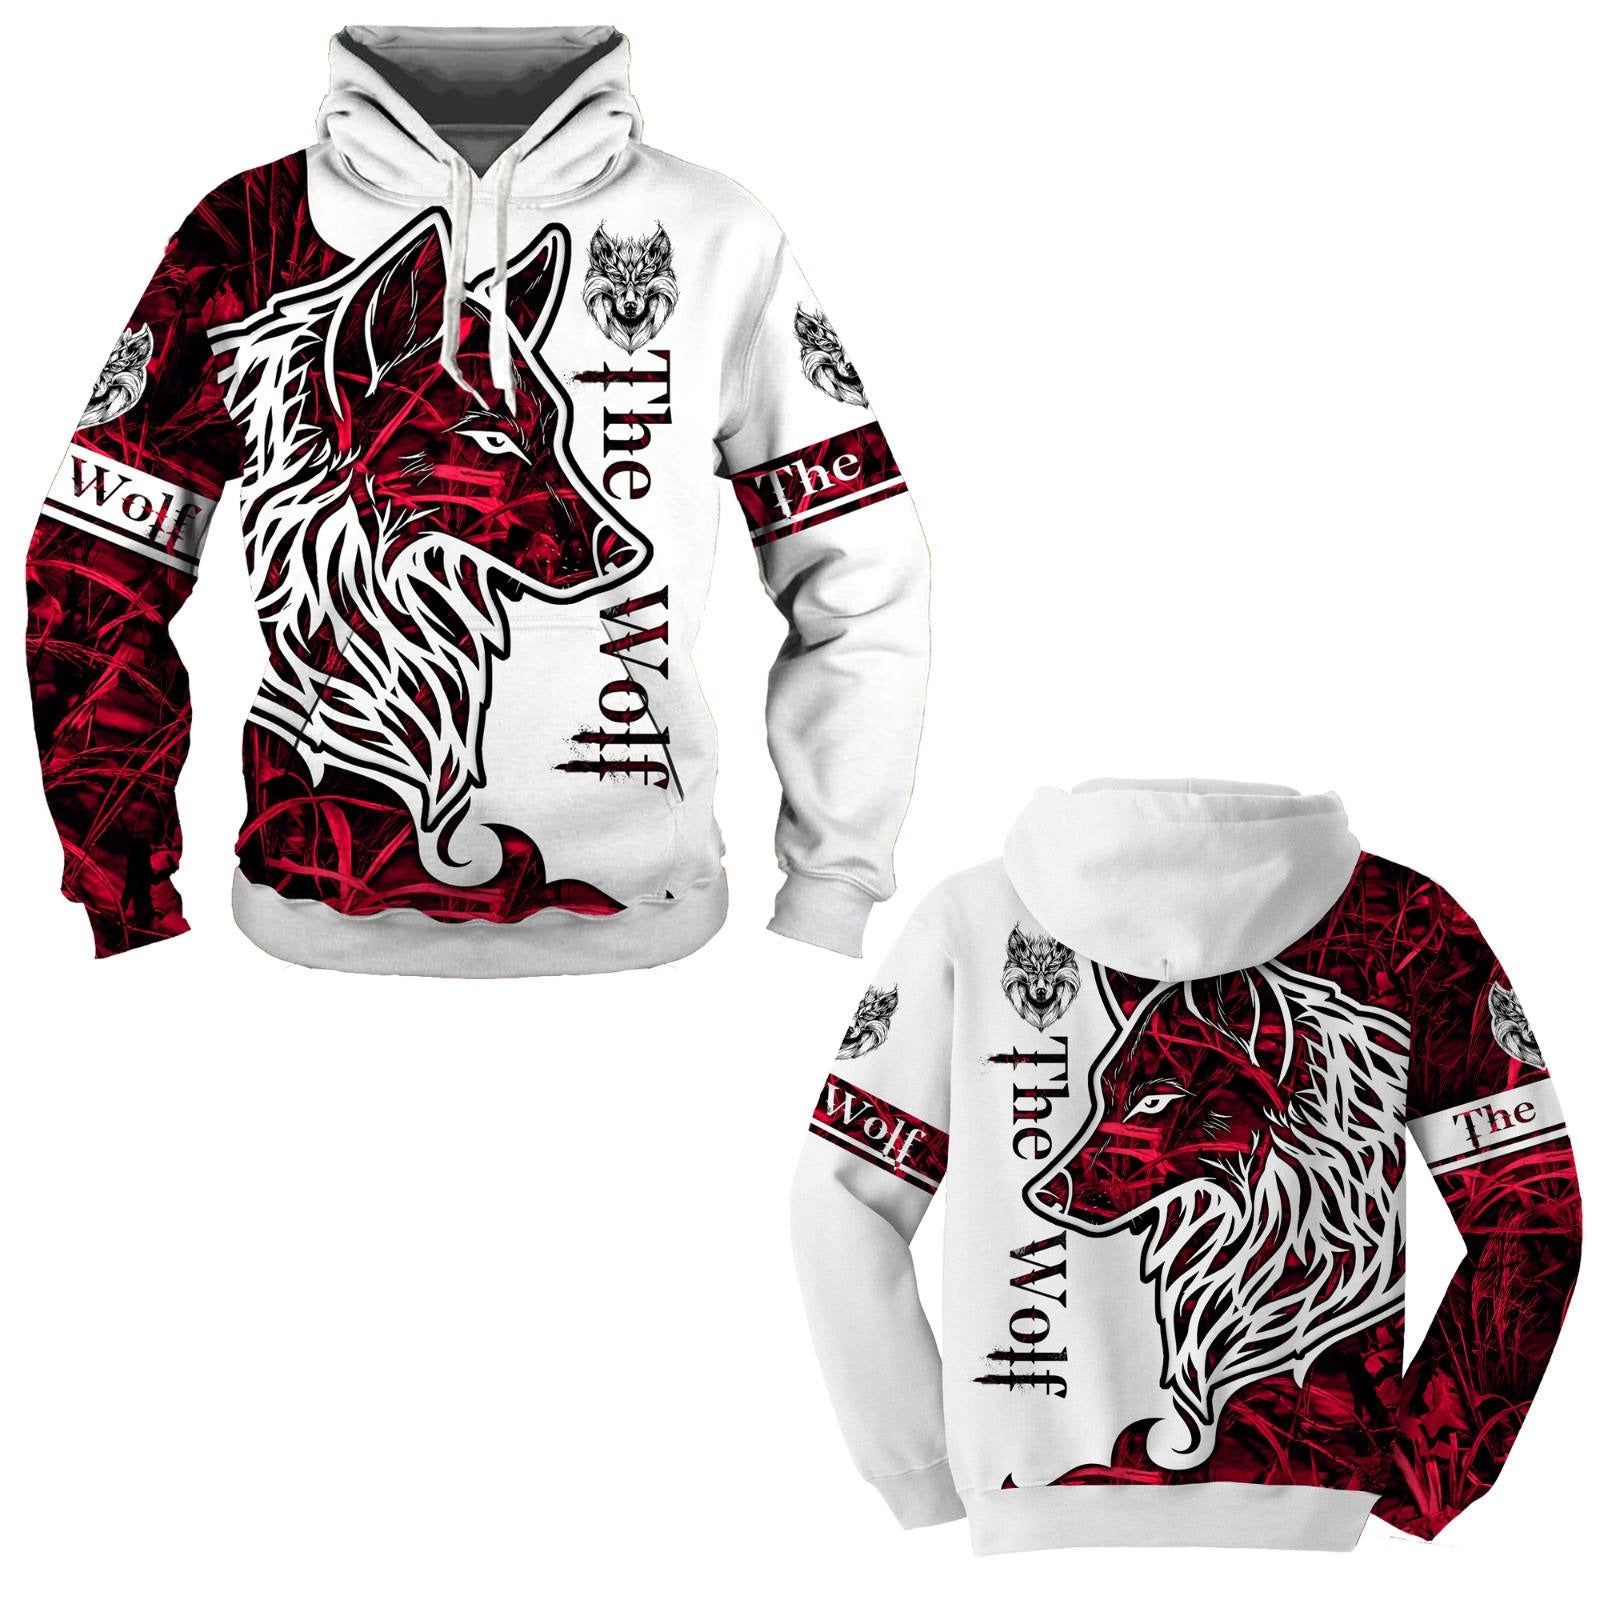 Red Wolf Mission - Cozy and warm jogging suit